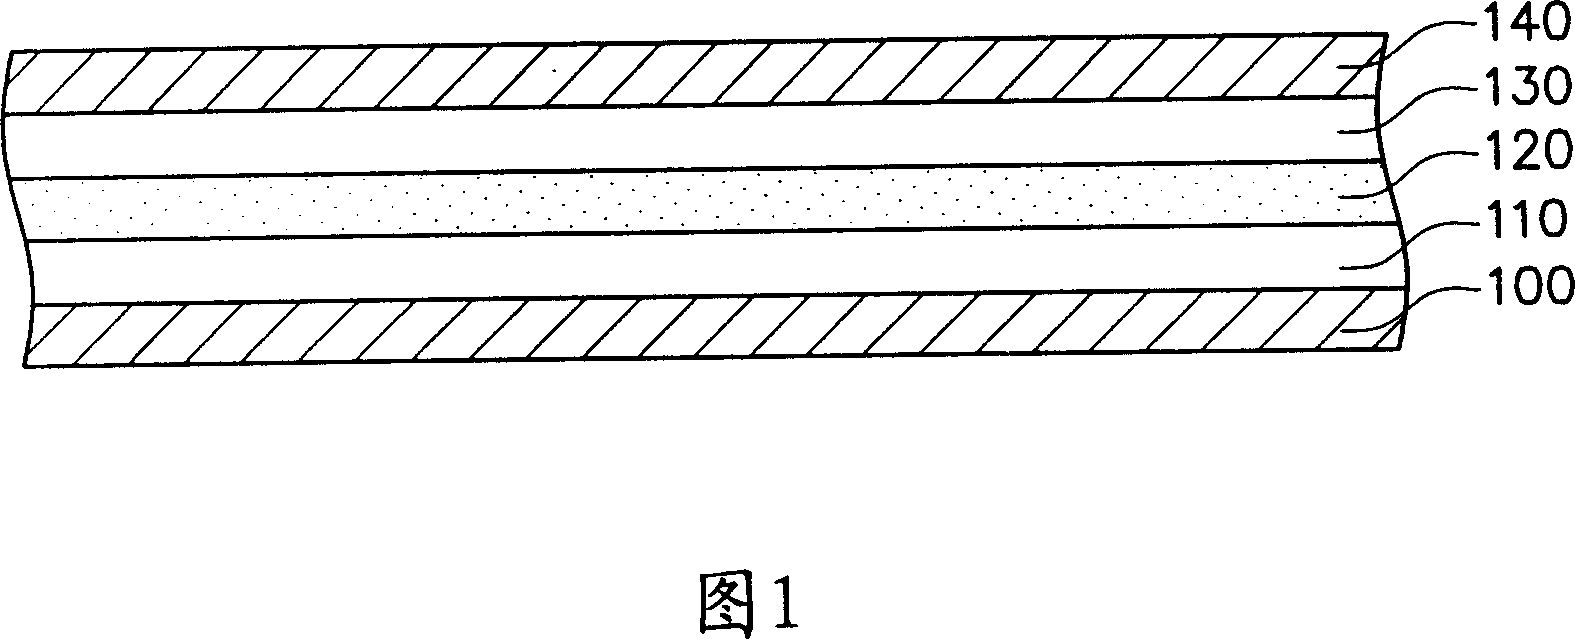 Polyimide copper foil laminates and method for manufacturing same